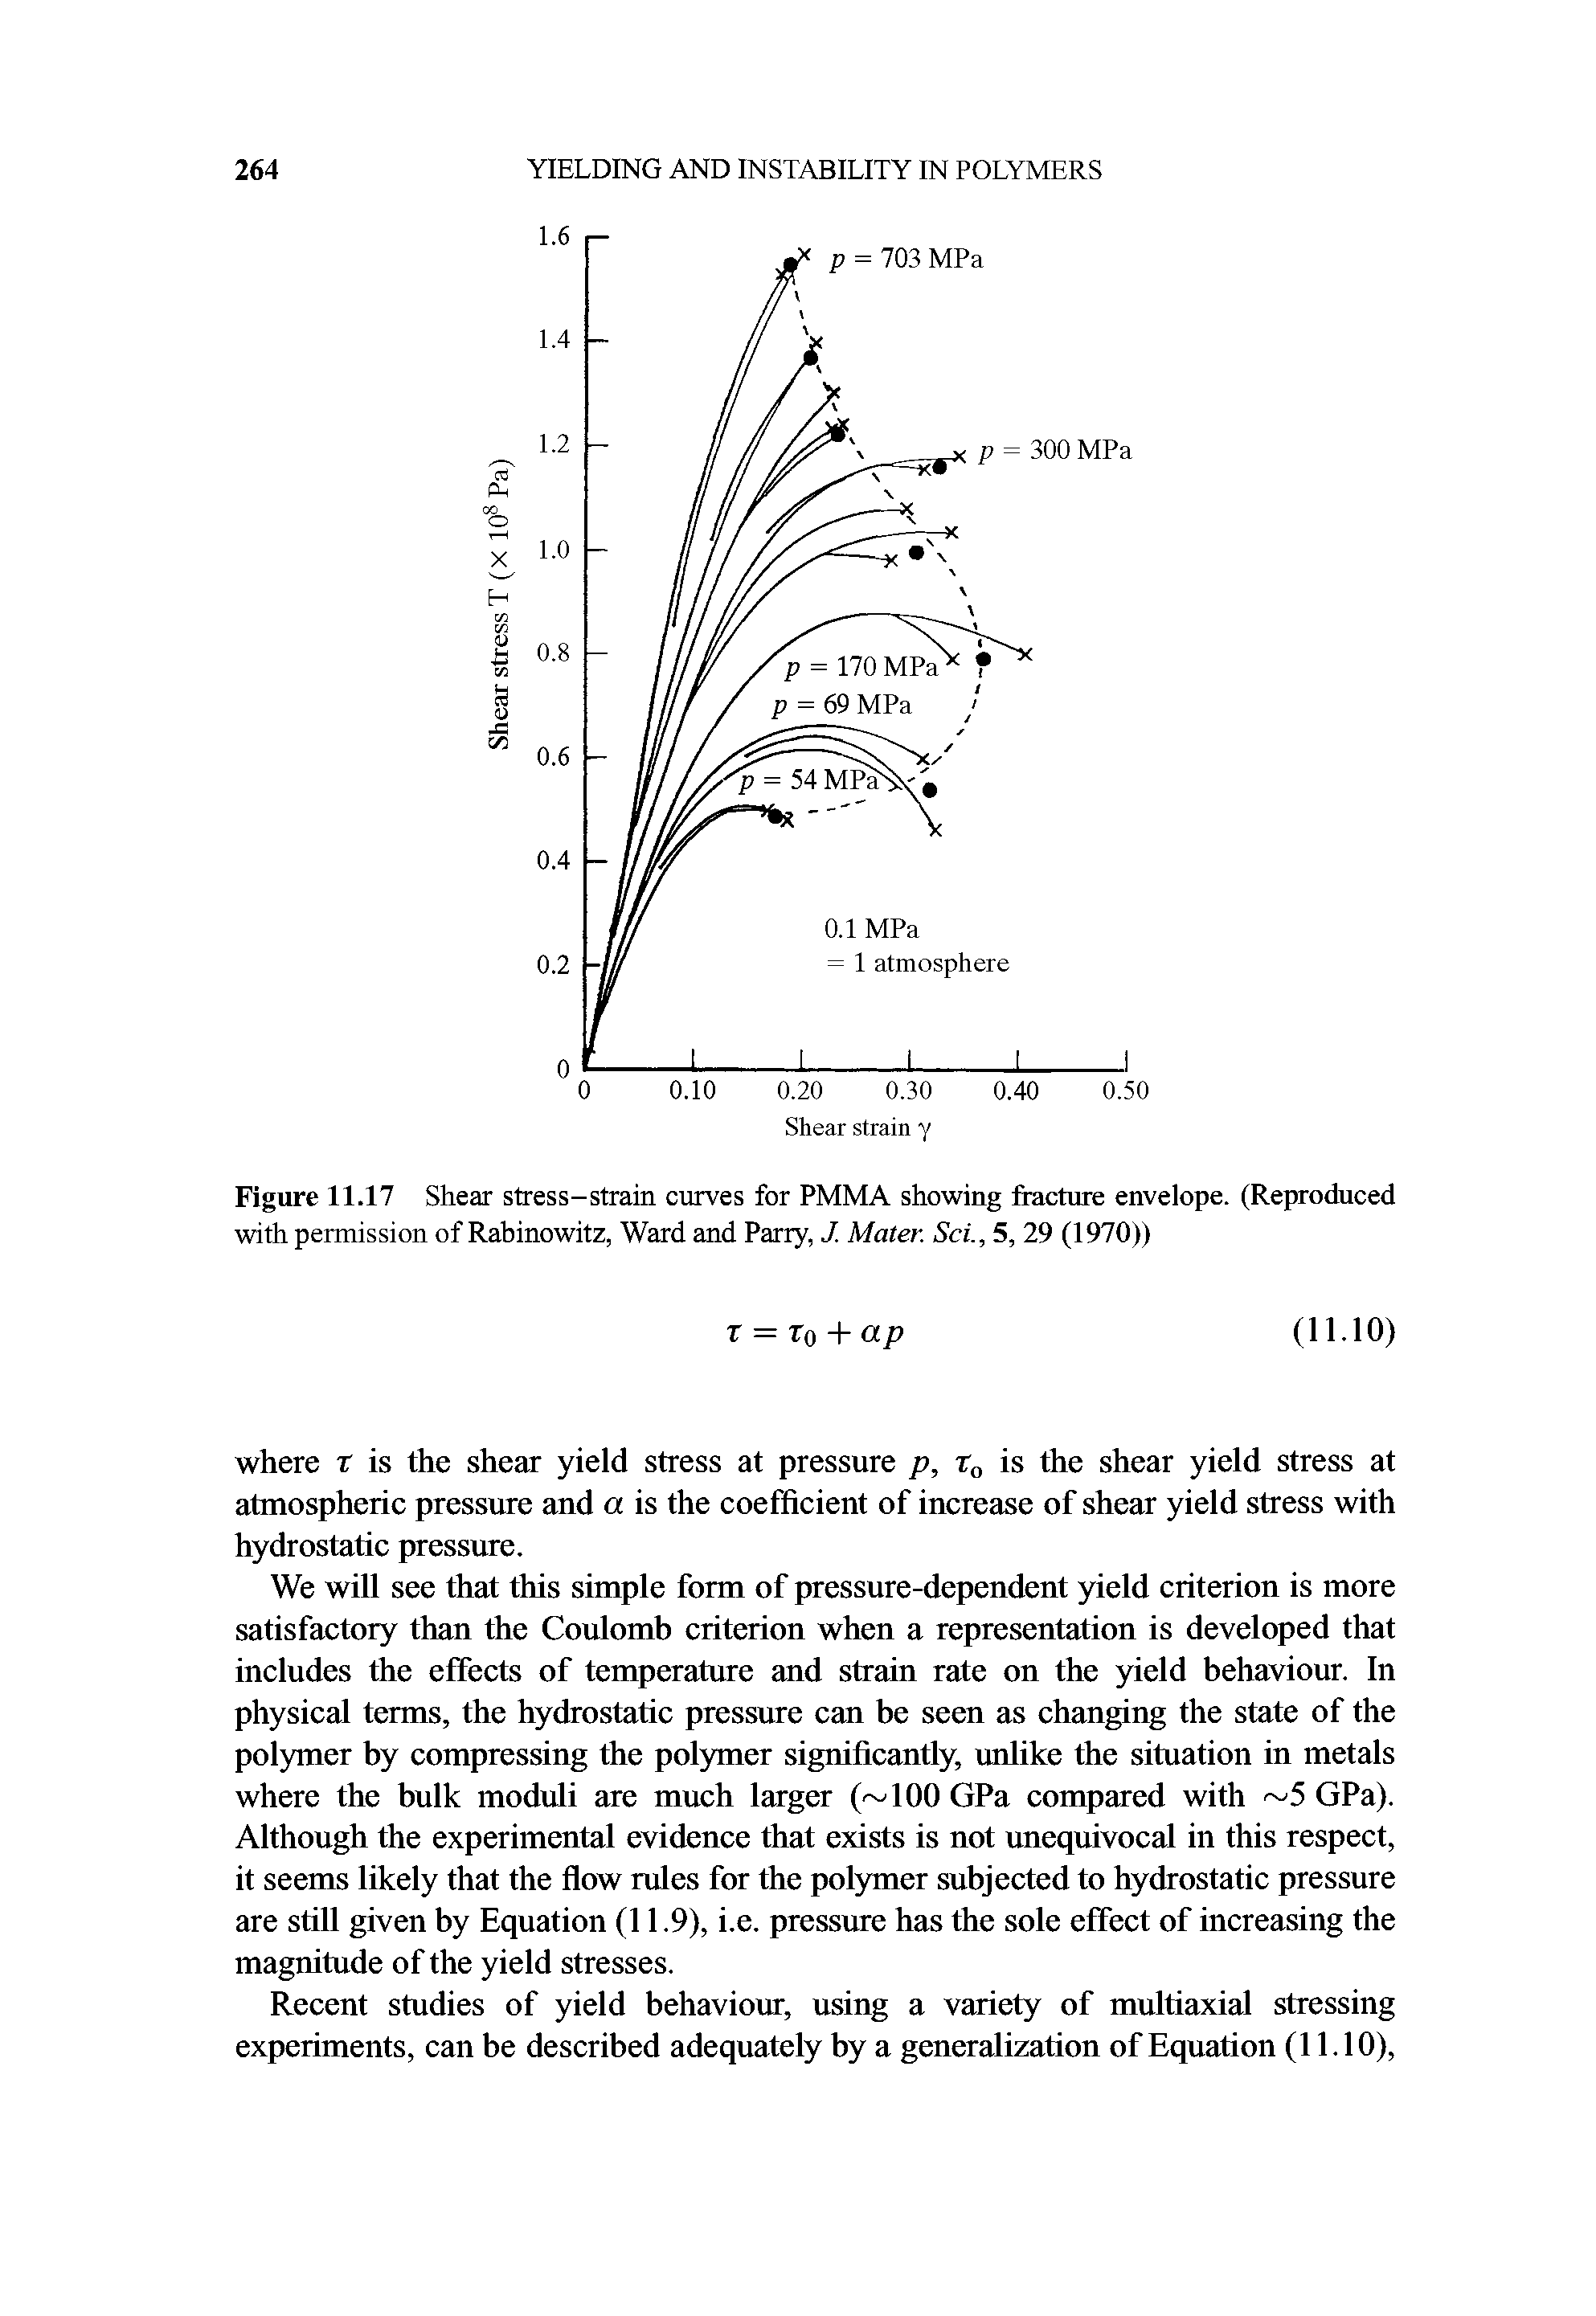 Figure 11.17 Shear stress-strain curves for PMMA showing fracture envelope. (Reproduced with permission of Rabinowitz, Ward and Parry, J. Mater. Set, 5, 29 (1970))...